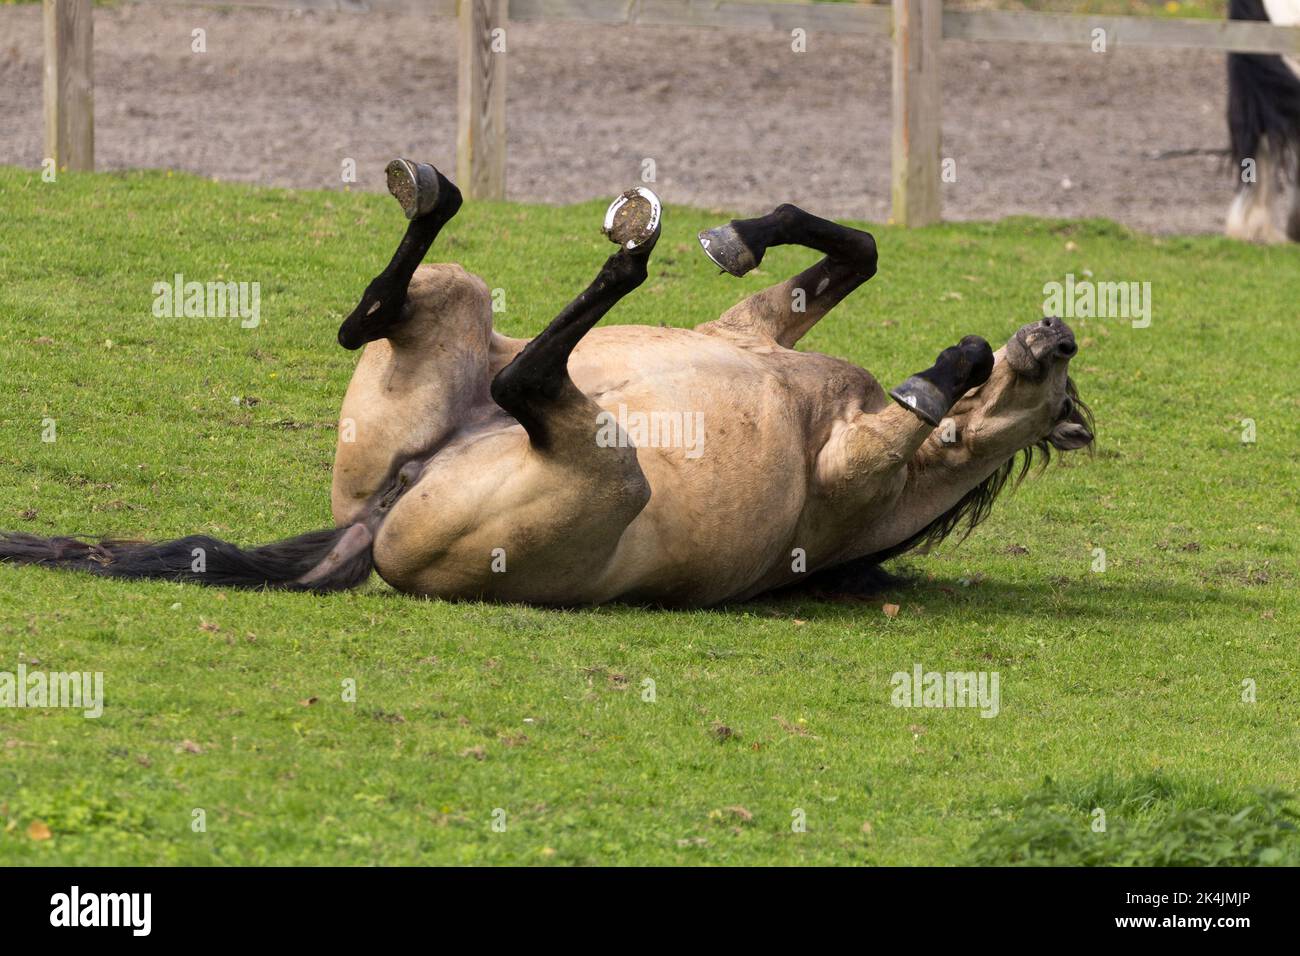 Female horse tan coloured just let out to graze is frolicking and rolling over on the short grass has dark lower legs mane and tail shows horse shoes Stock Photo